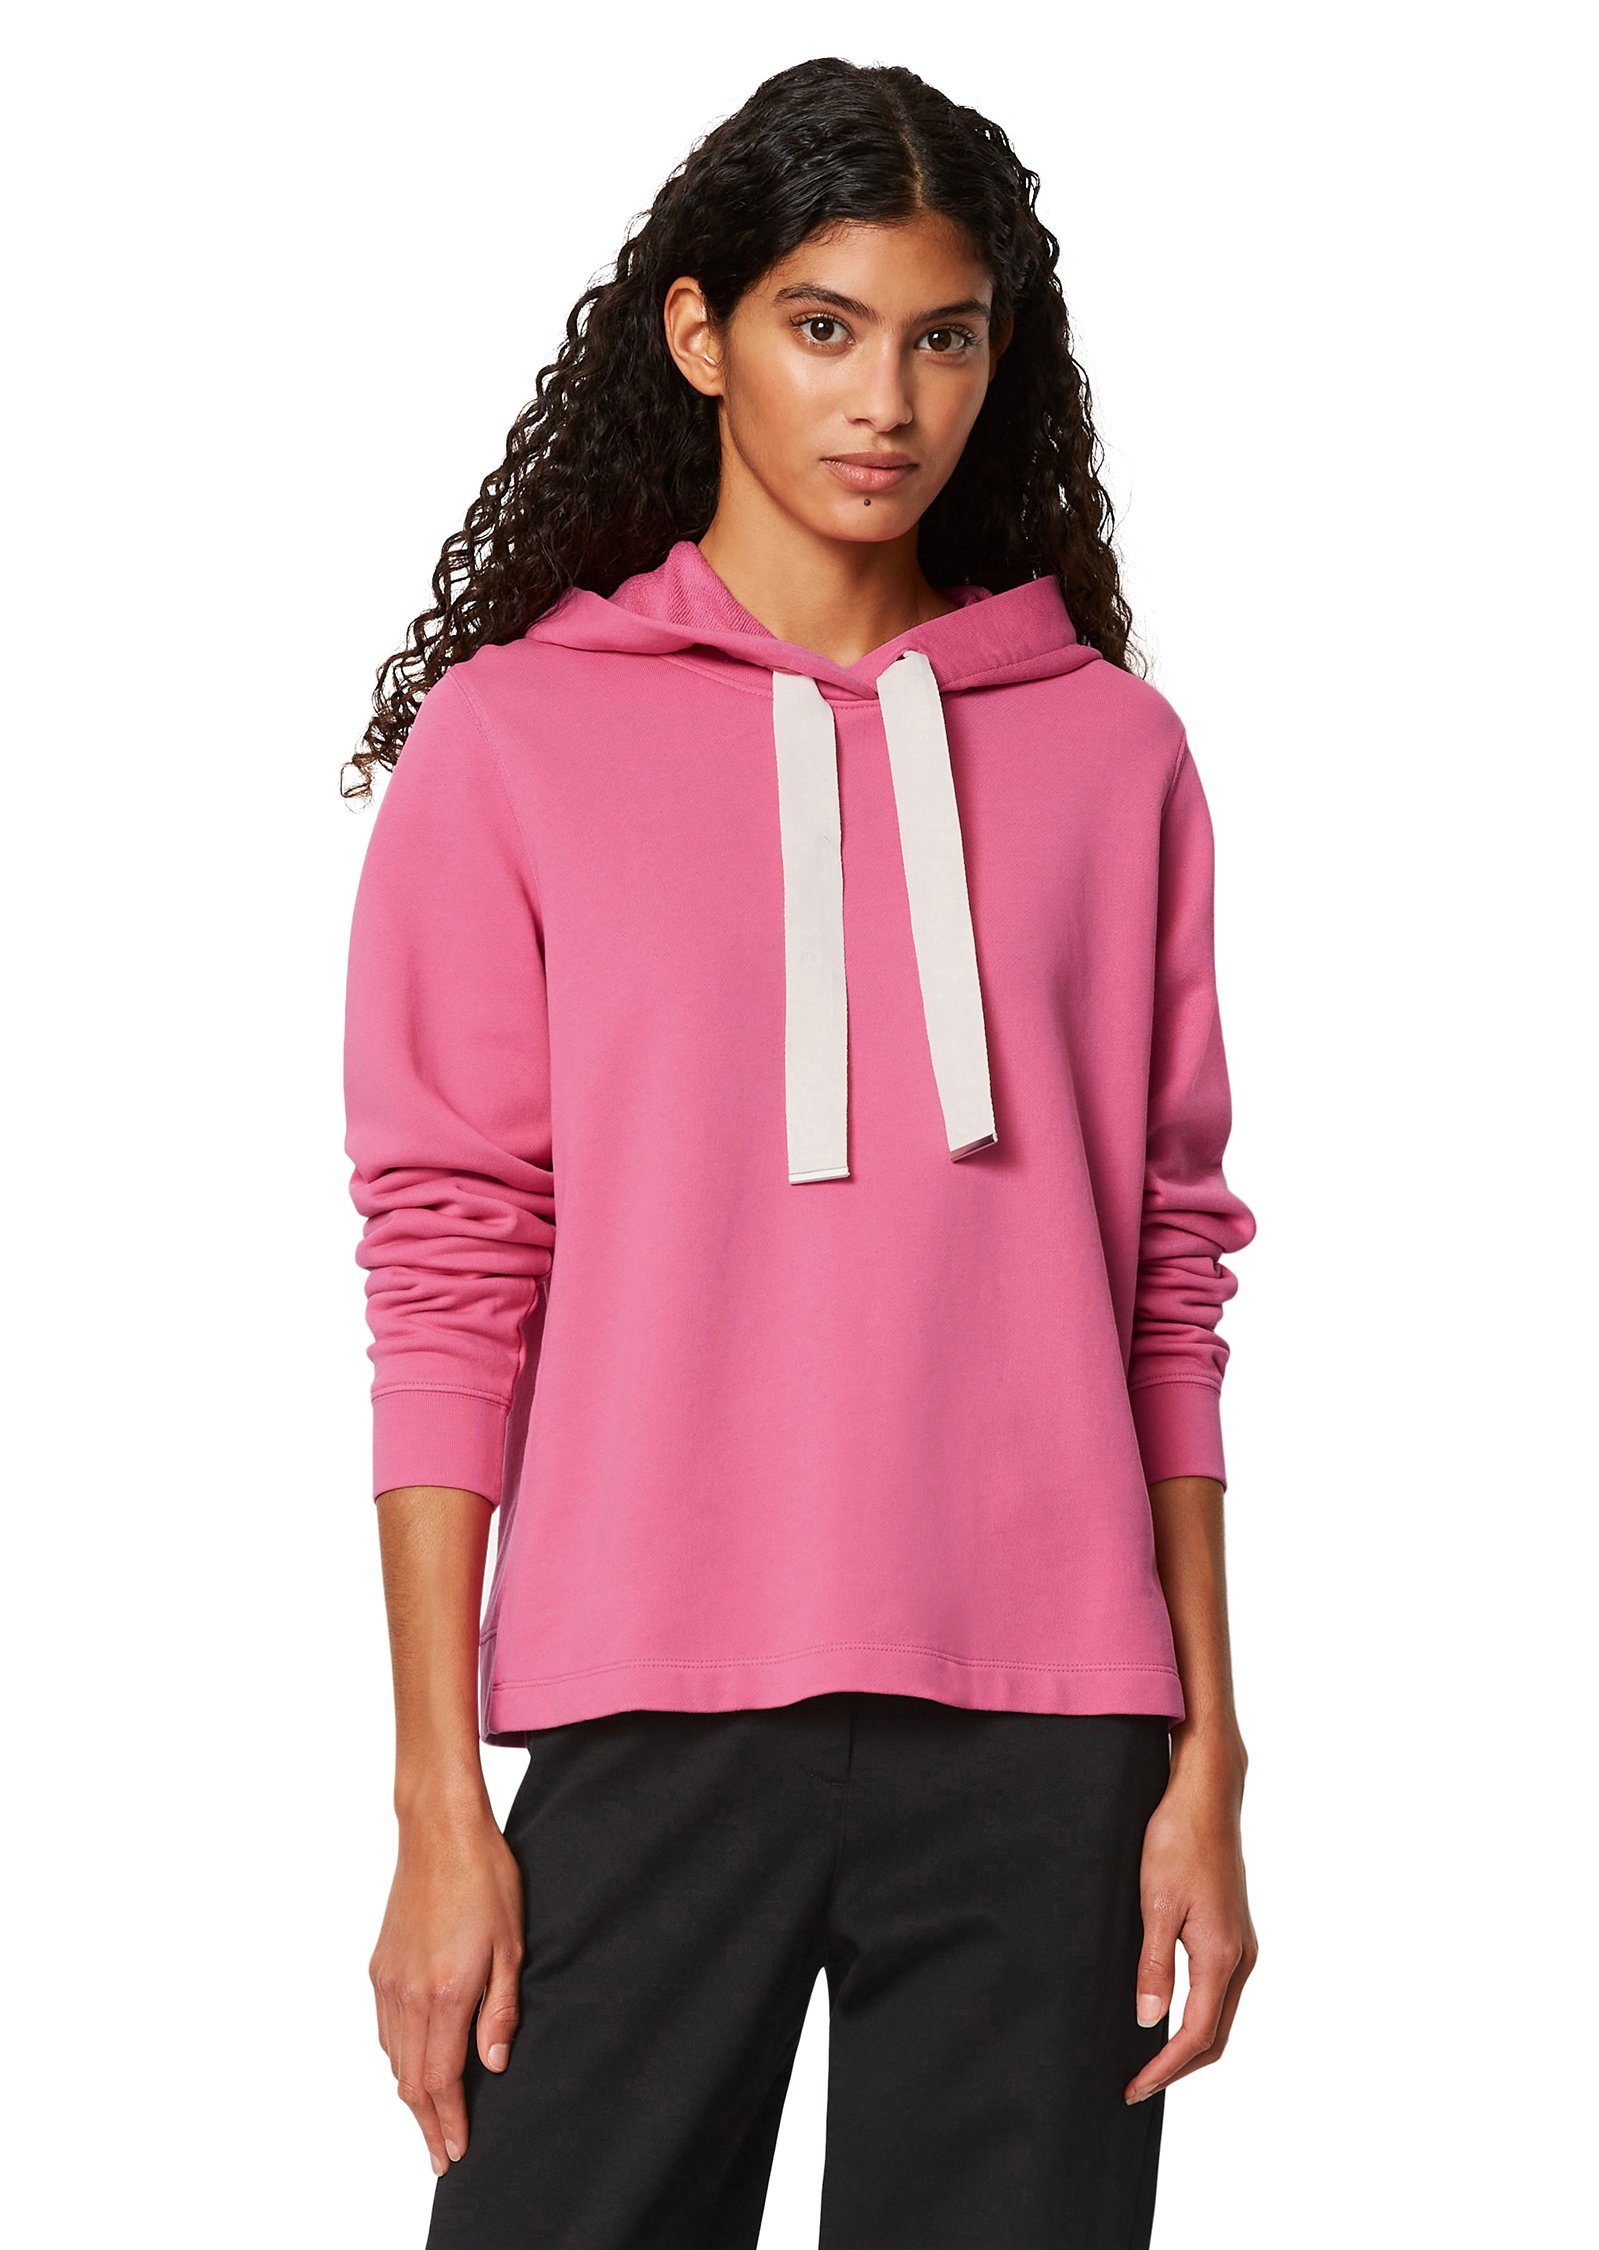 Marc O'Polo rose pink Hoodie